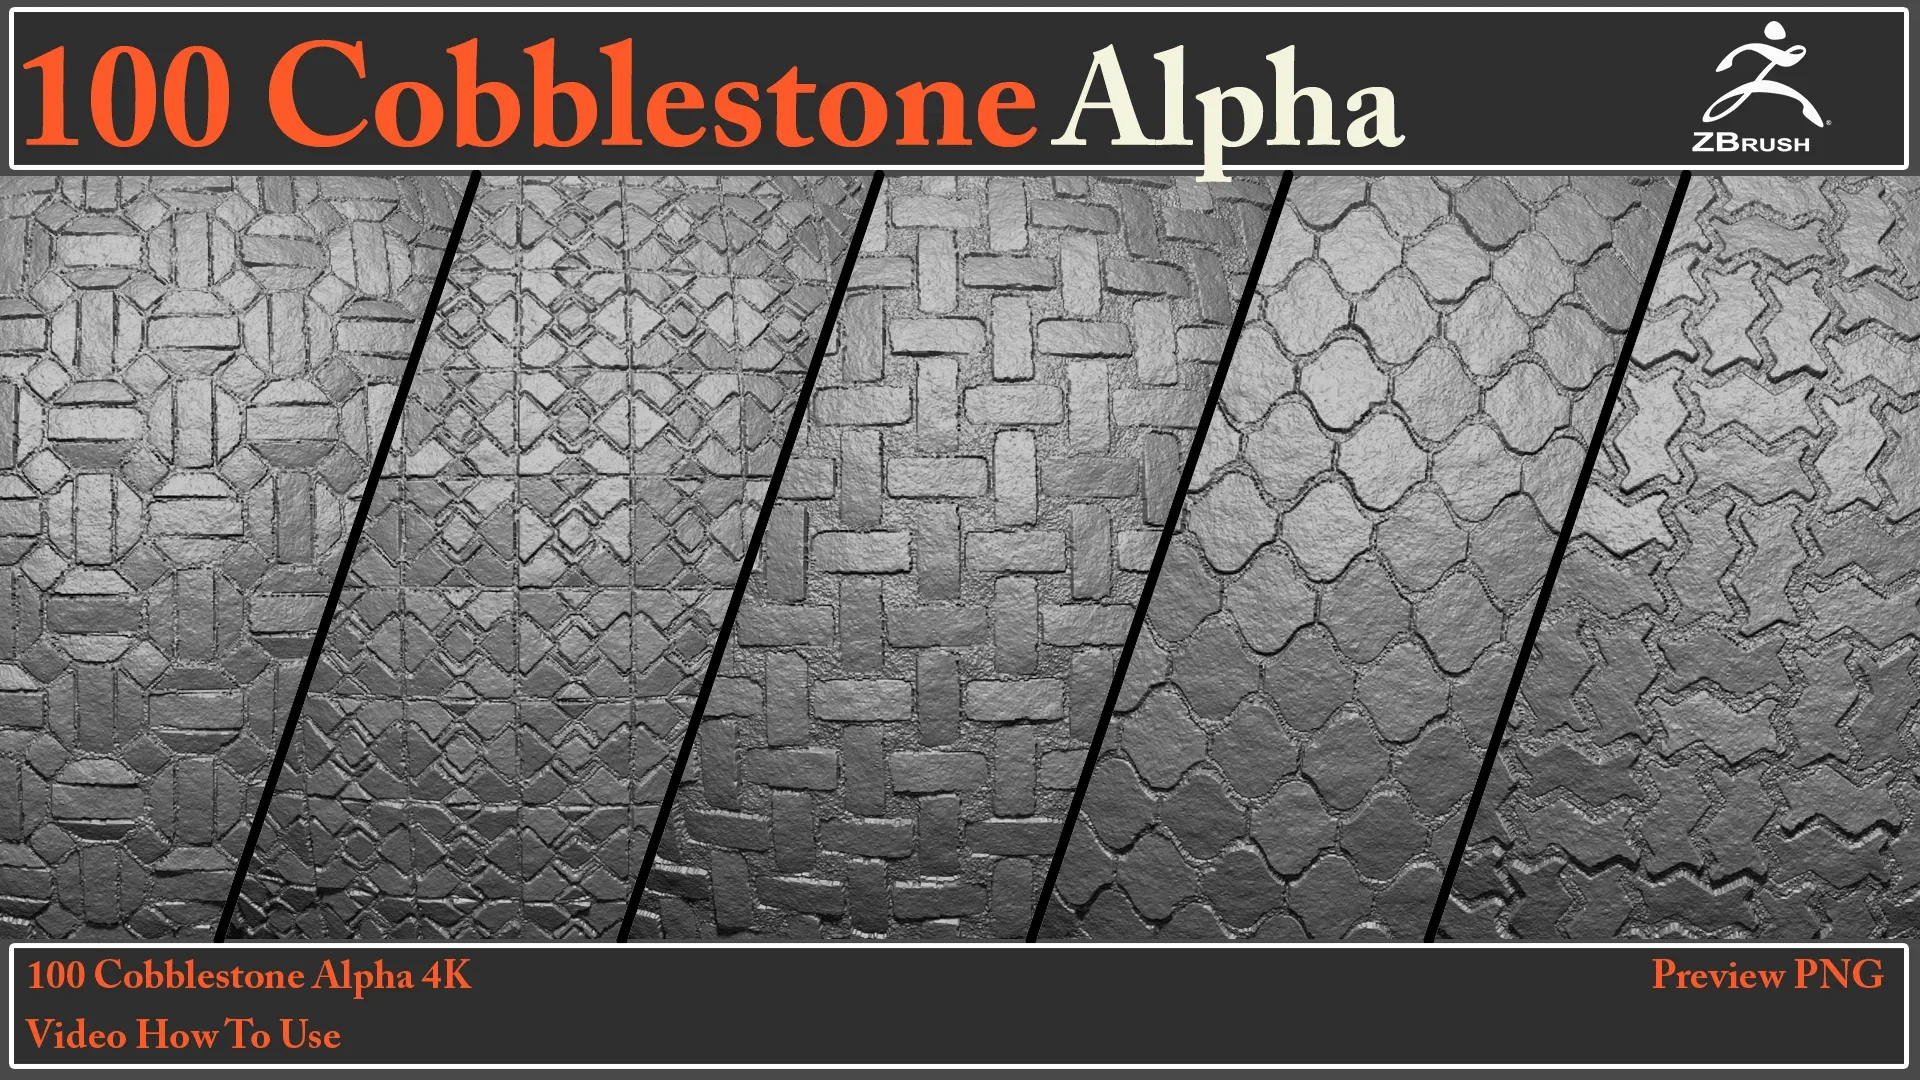 100 Cobblestone Alpha Maps + Video How To Use